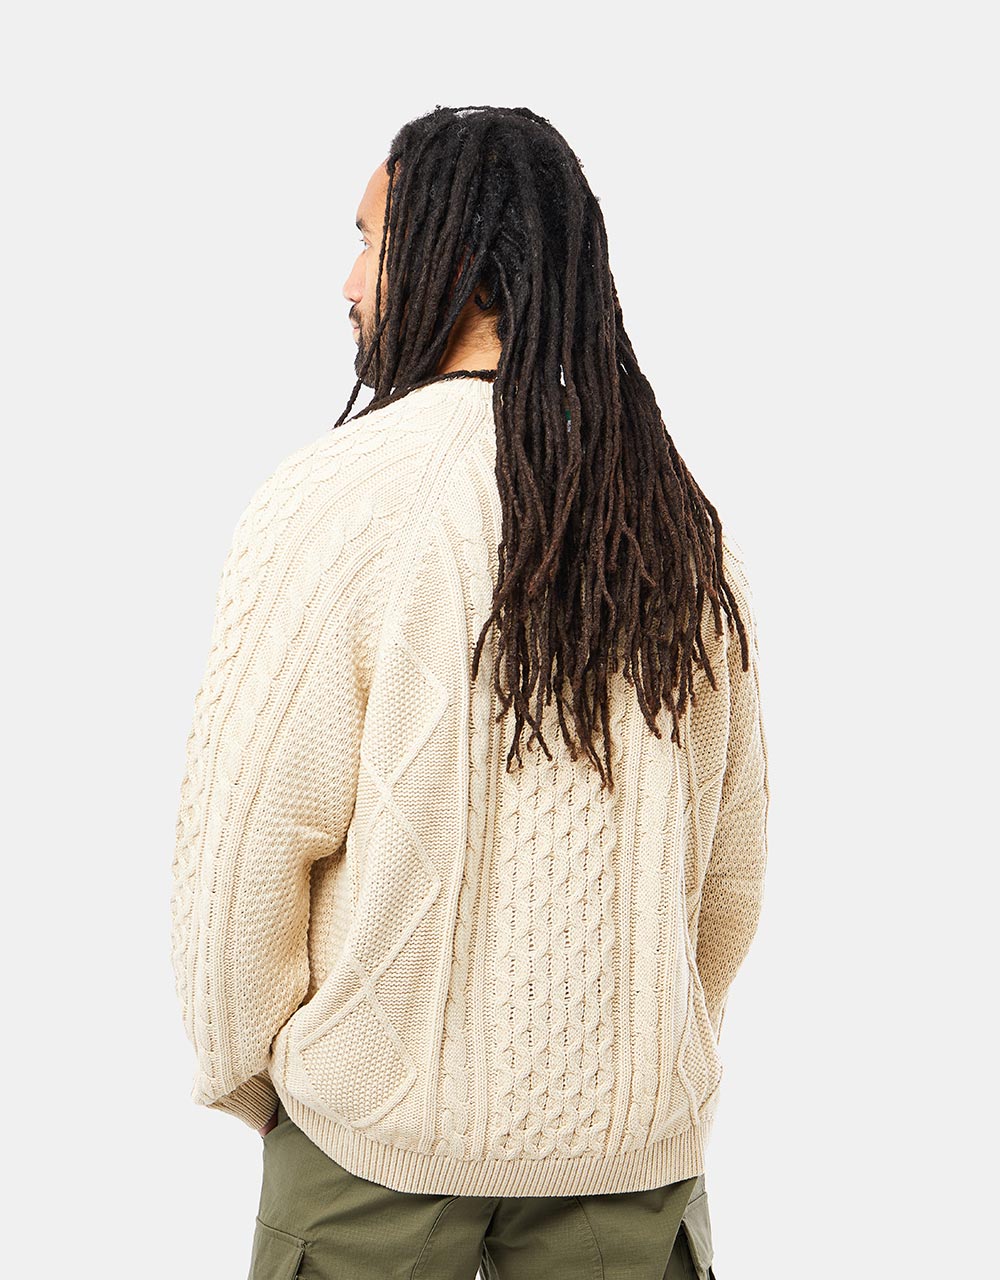 Nike Cable Knit Sweater - Rattan